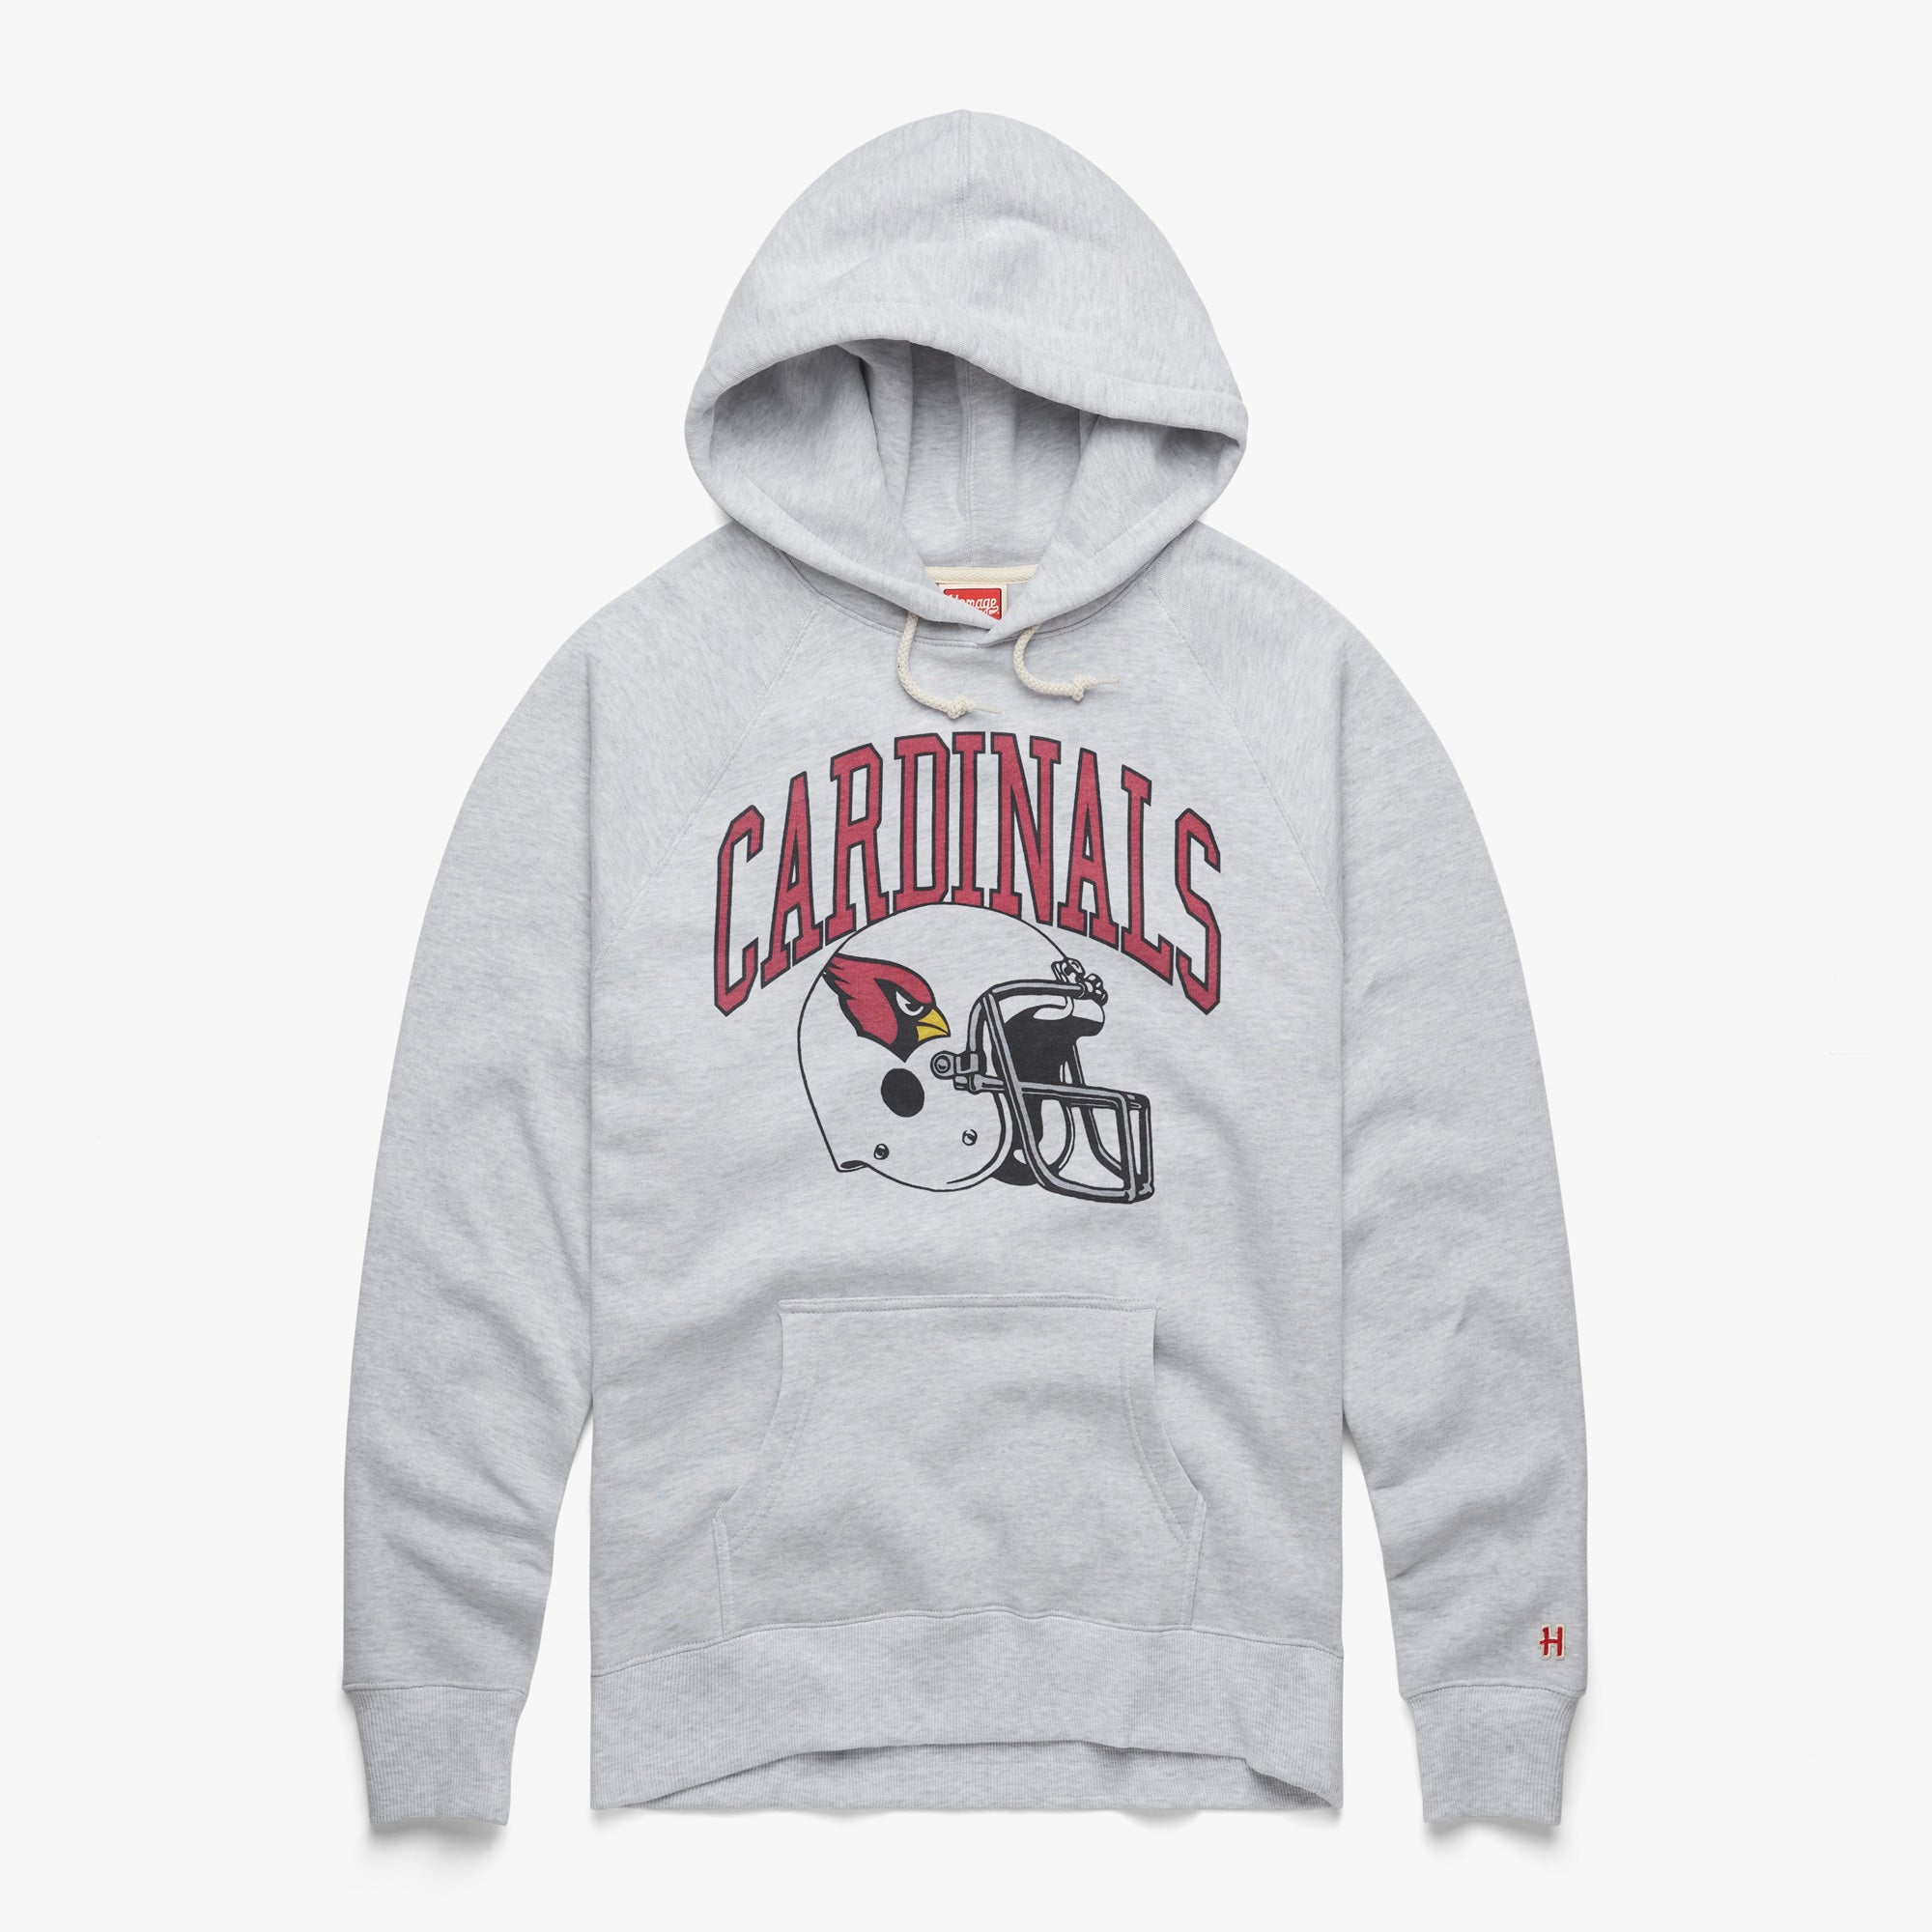 Arizona Cardinals Helmet Hoodie from Homage. | Officially Licensed Vintage NFL Apparel from Homage Pro Shop.